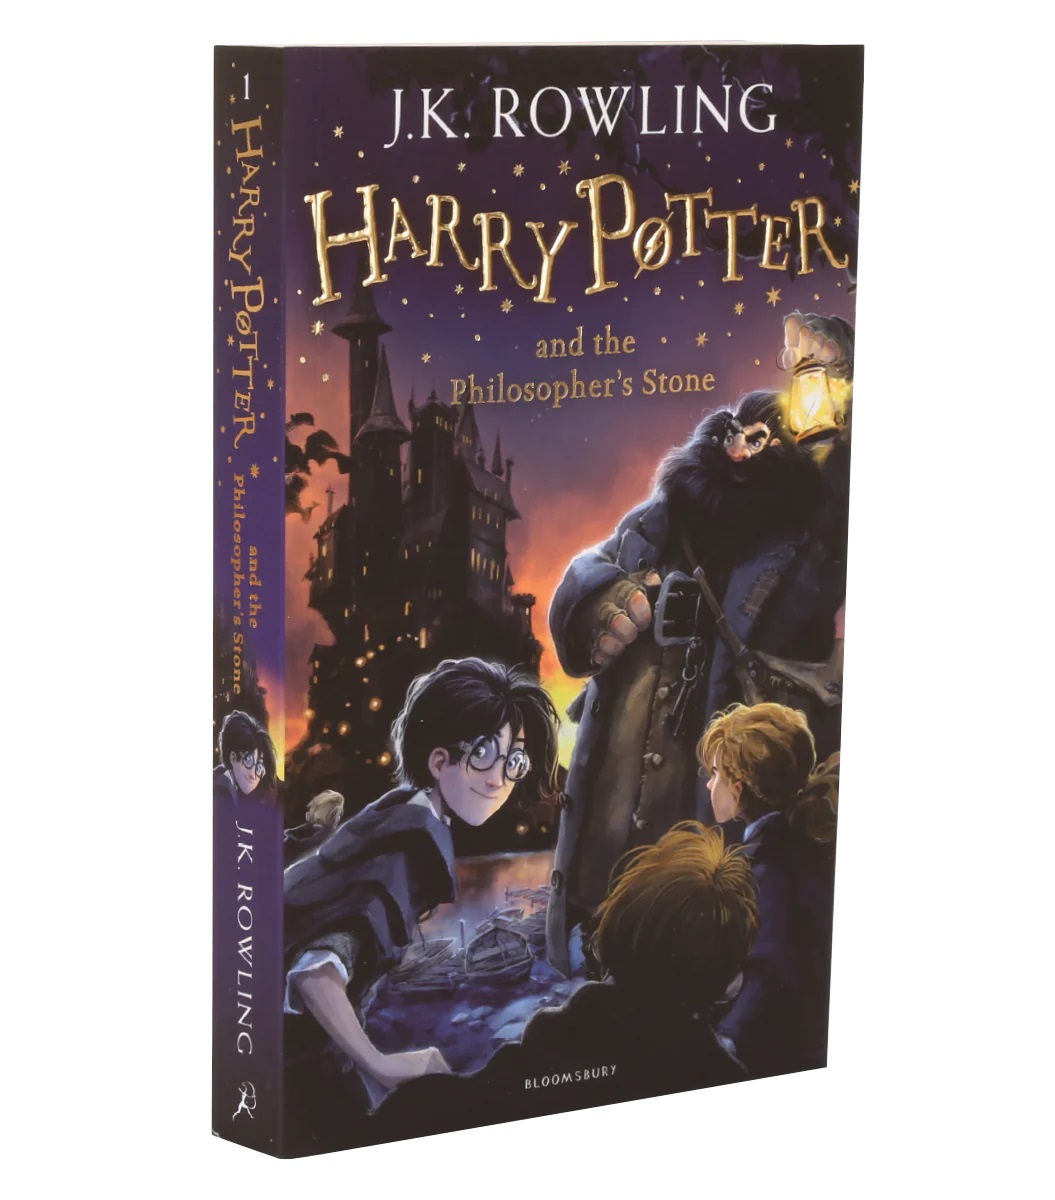 Book The Classic Harry Potter Series - book 3 : Harry Potter and the Prisoner of Azkaban